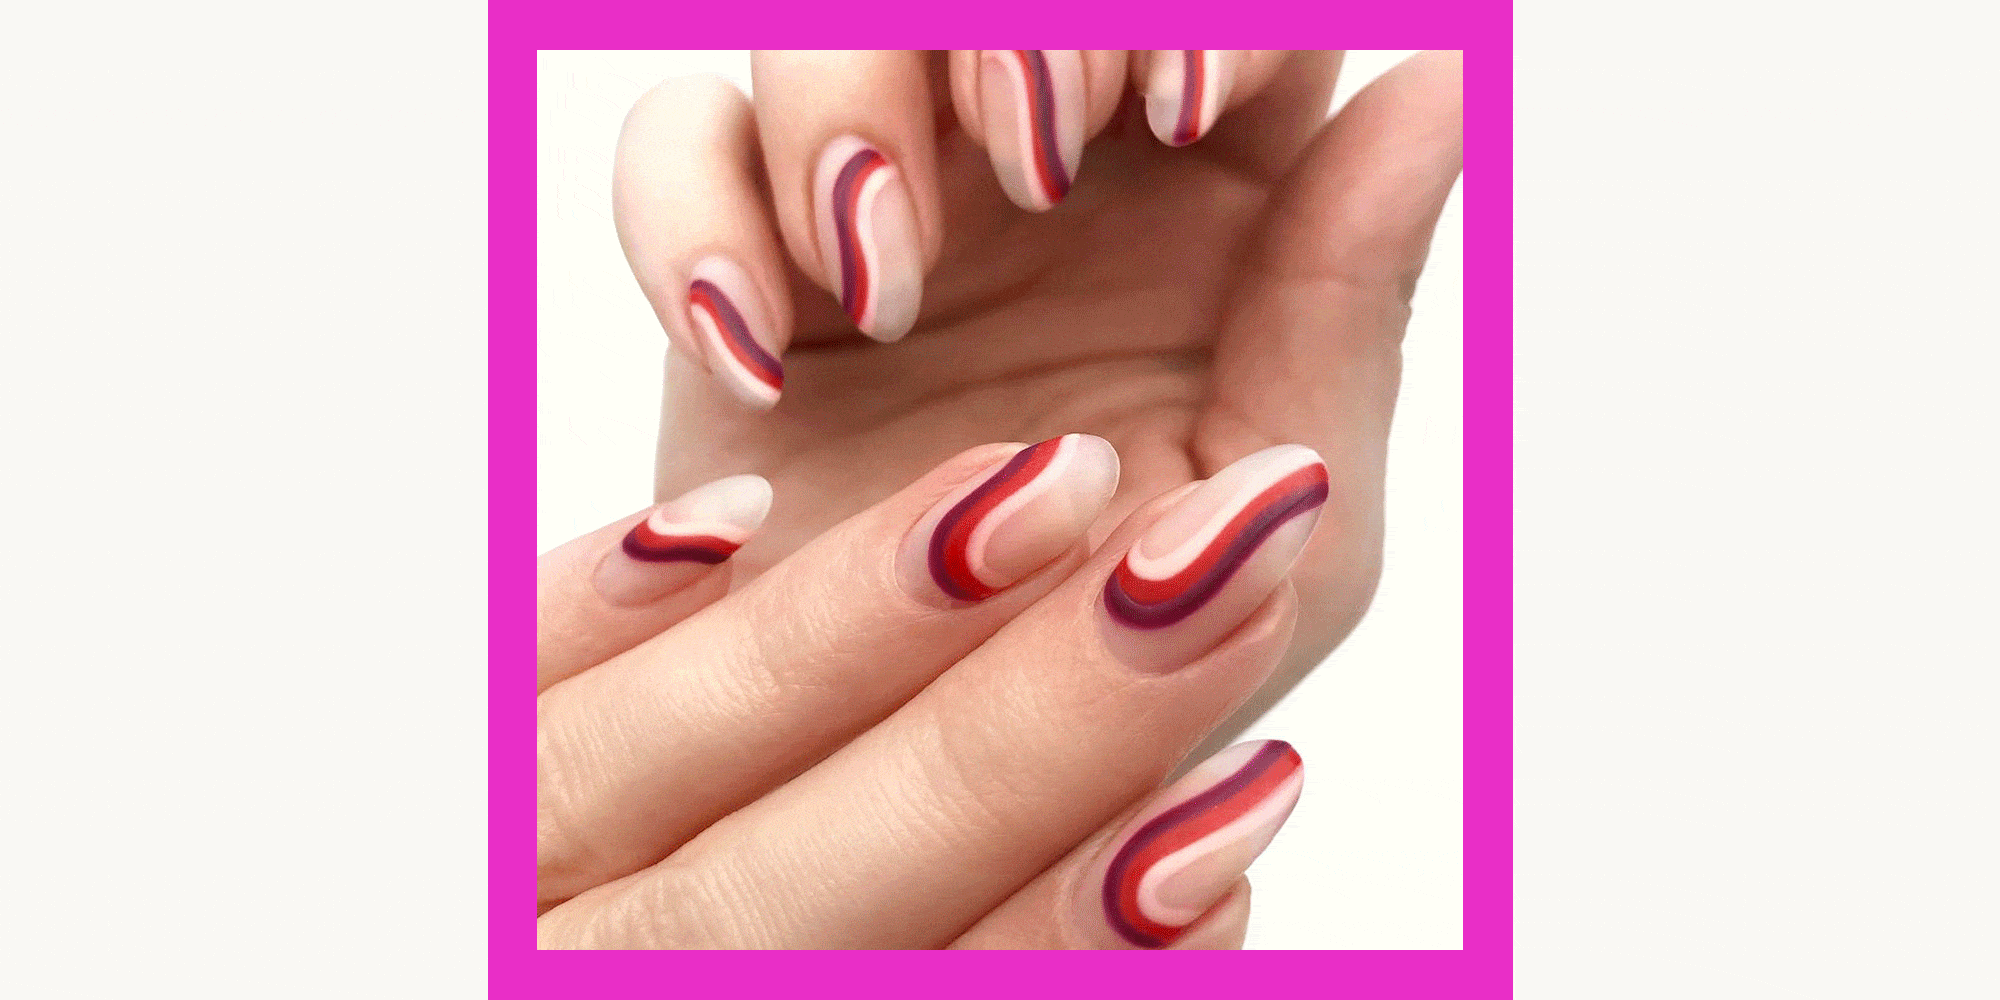 7. "Valentine's Day Nail Art Ideas That Will Make Your Heart Skip a Beat" - wide 4